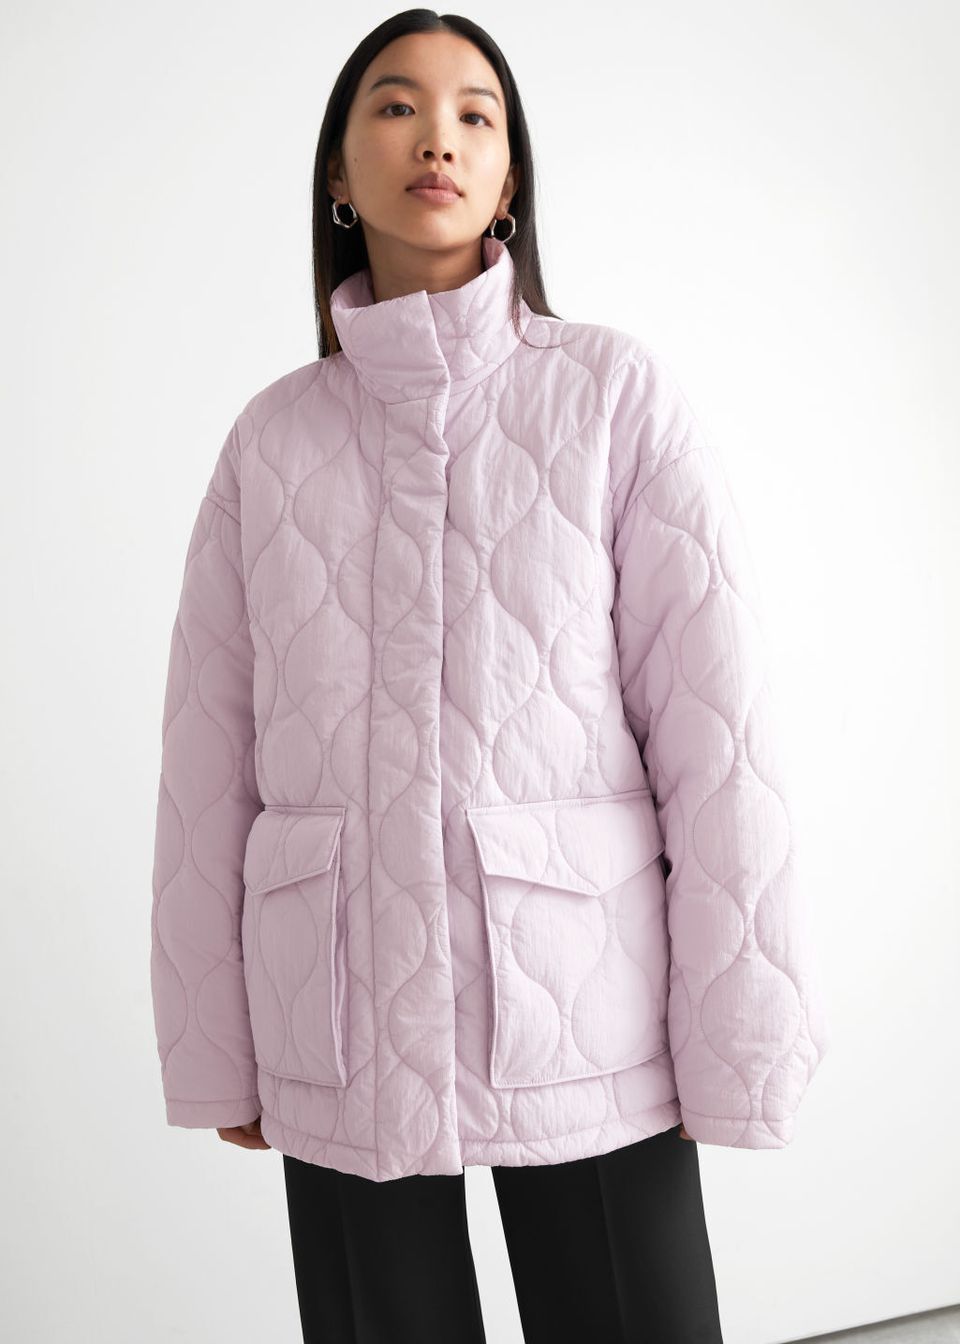 Shop The Trend: Light Quilted Jackets For Transitional Weather ...